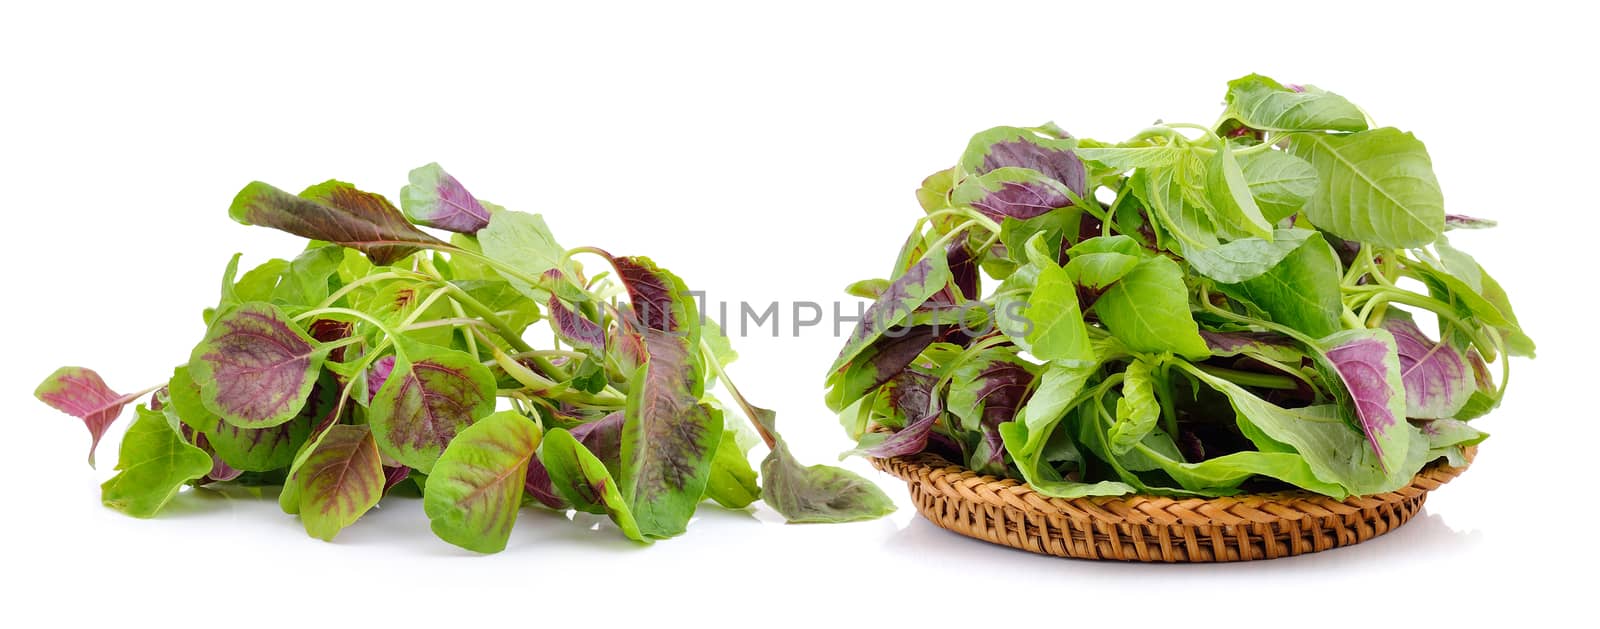 spinach in the basket on white background by sommai